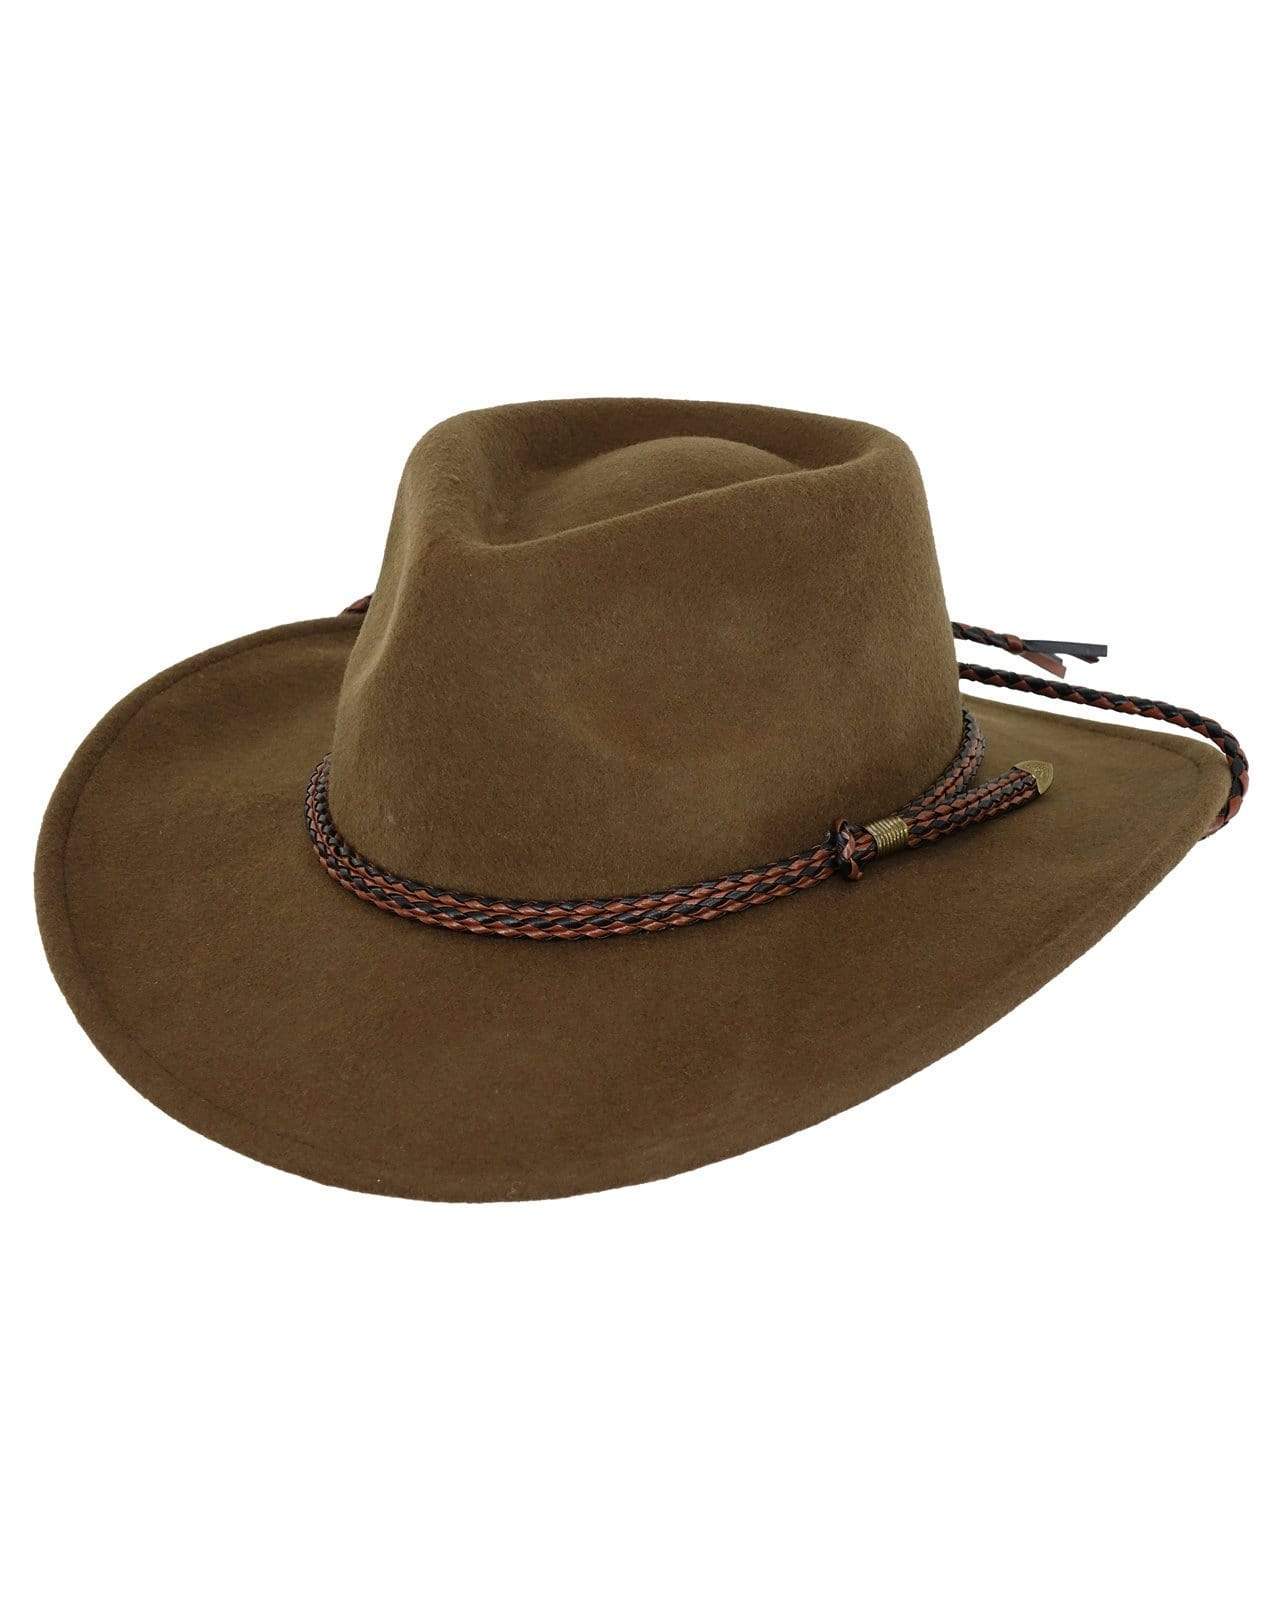 Broken Hill | Felt Hats by Outback Trading OutbackTrading.com